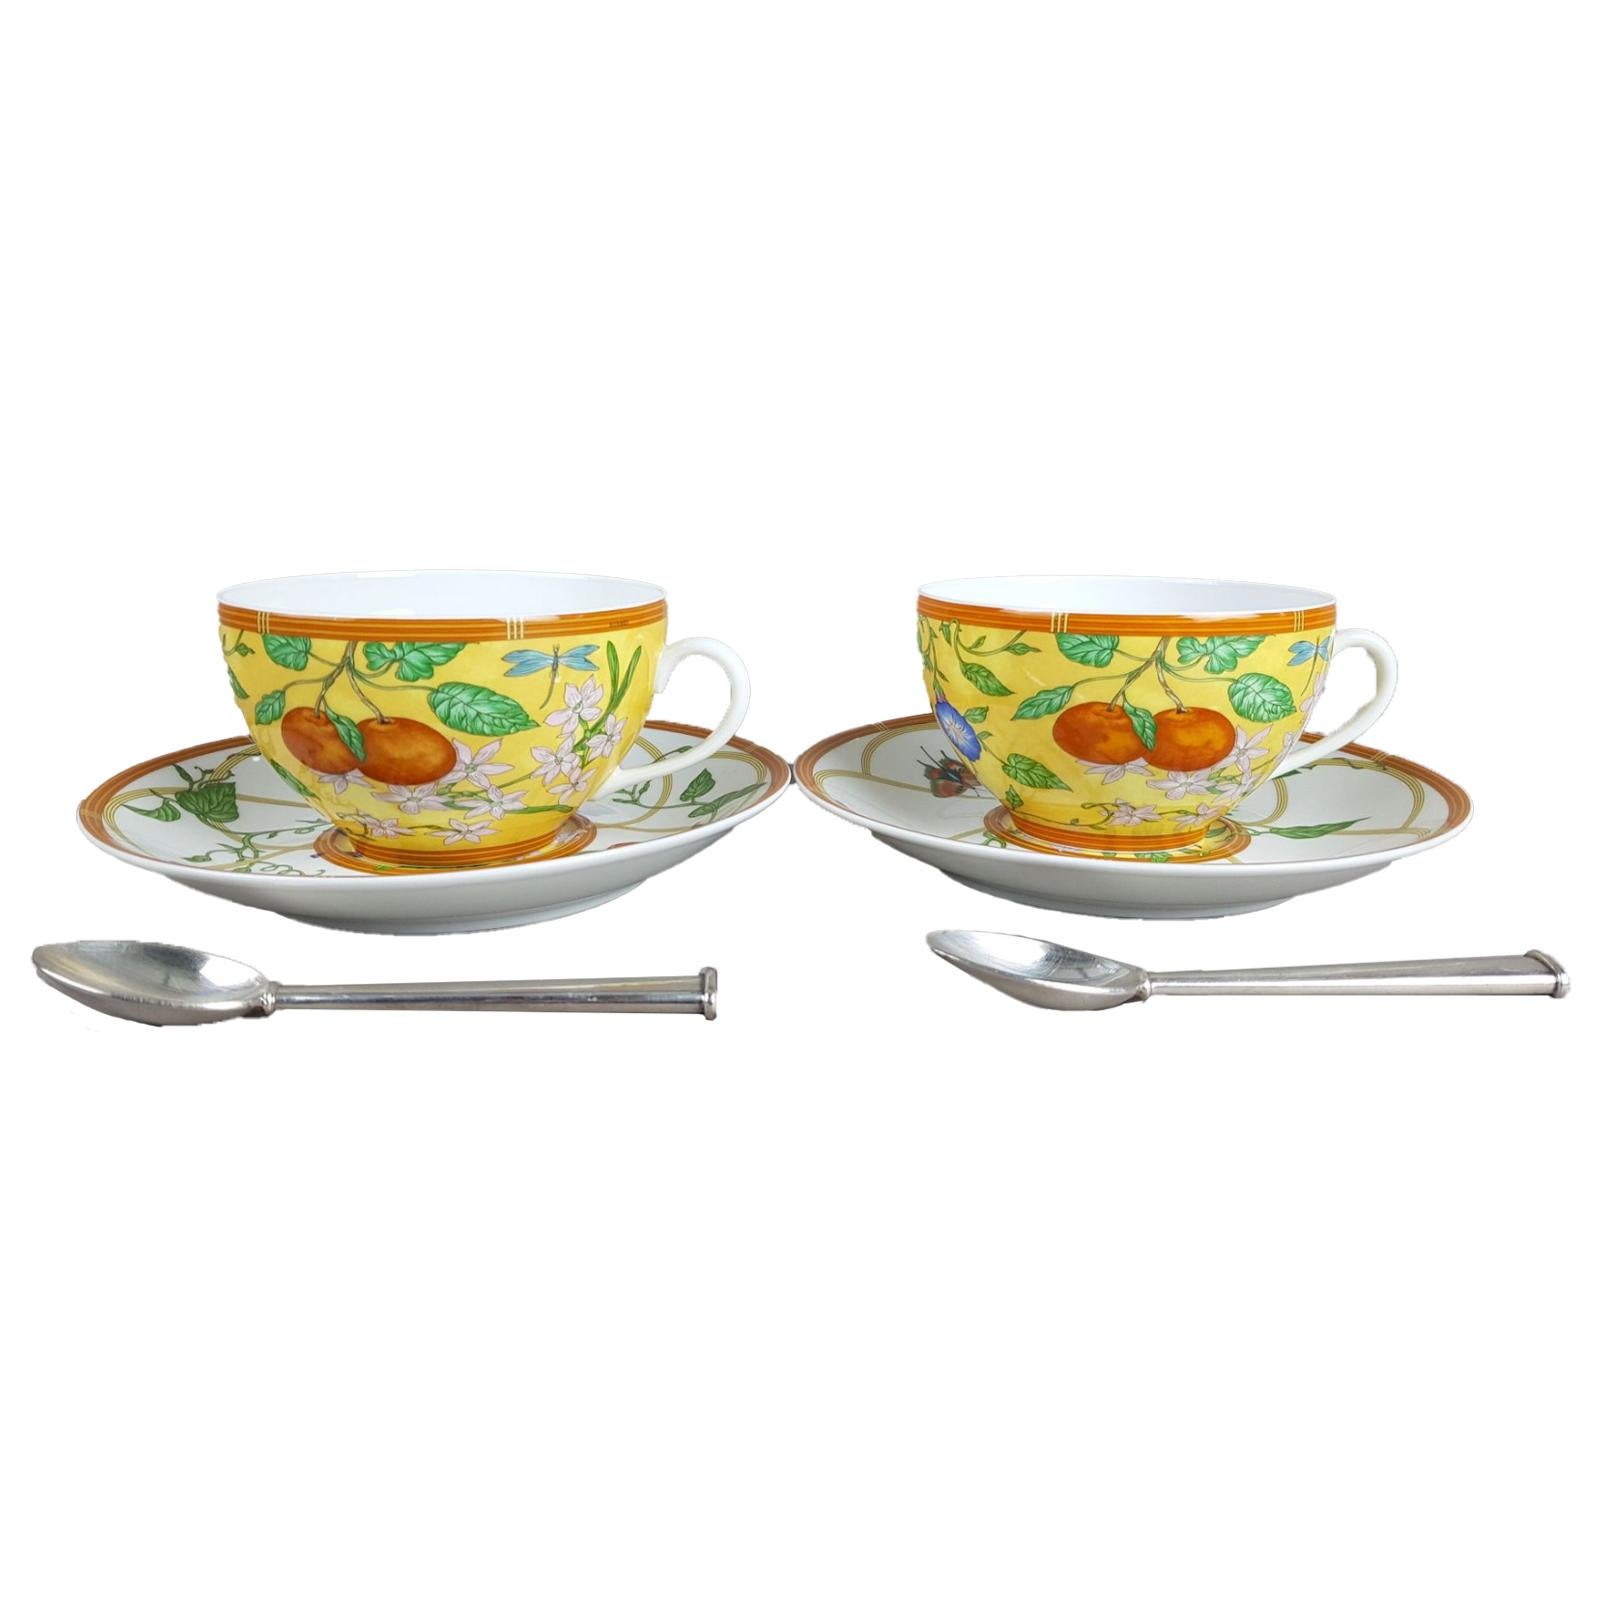 Features:
Material: porcelain decorated with fruit, bindweed and butterflies on an orange-yellow Marly background.

2 Cups with saucers
Dimensions: plates:
cups: H: 11.5 x W: 14 x D: 14 cm
saucers: H: 2.5 x W: 18 cm
Almost new